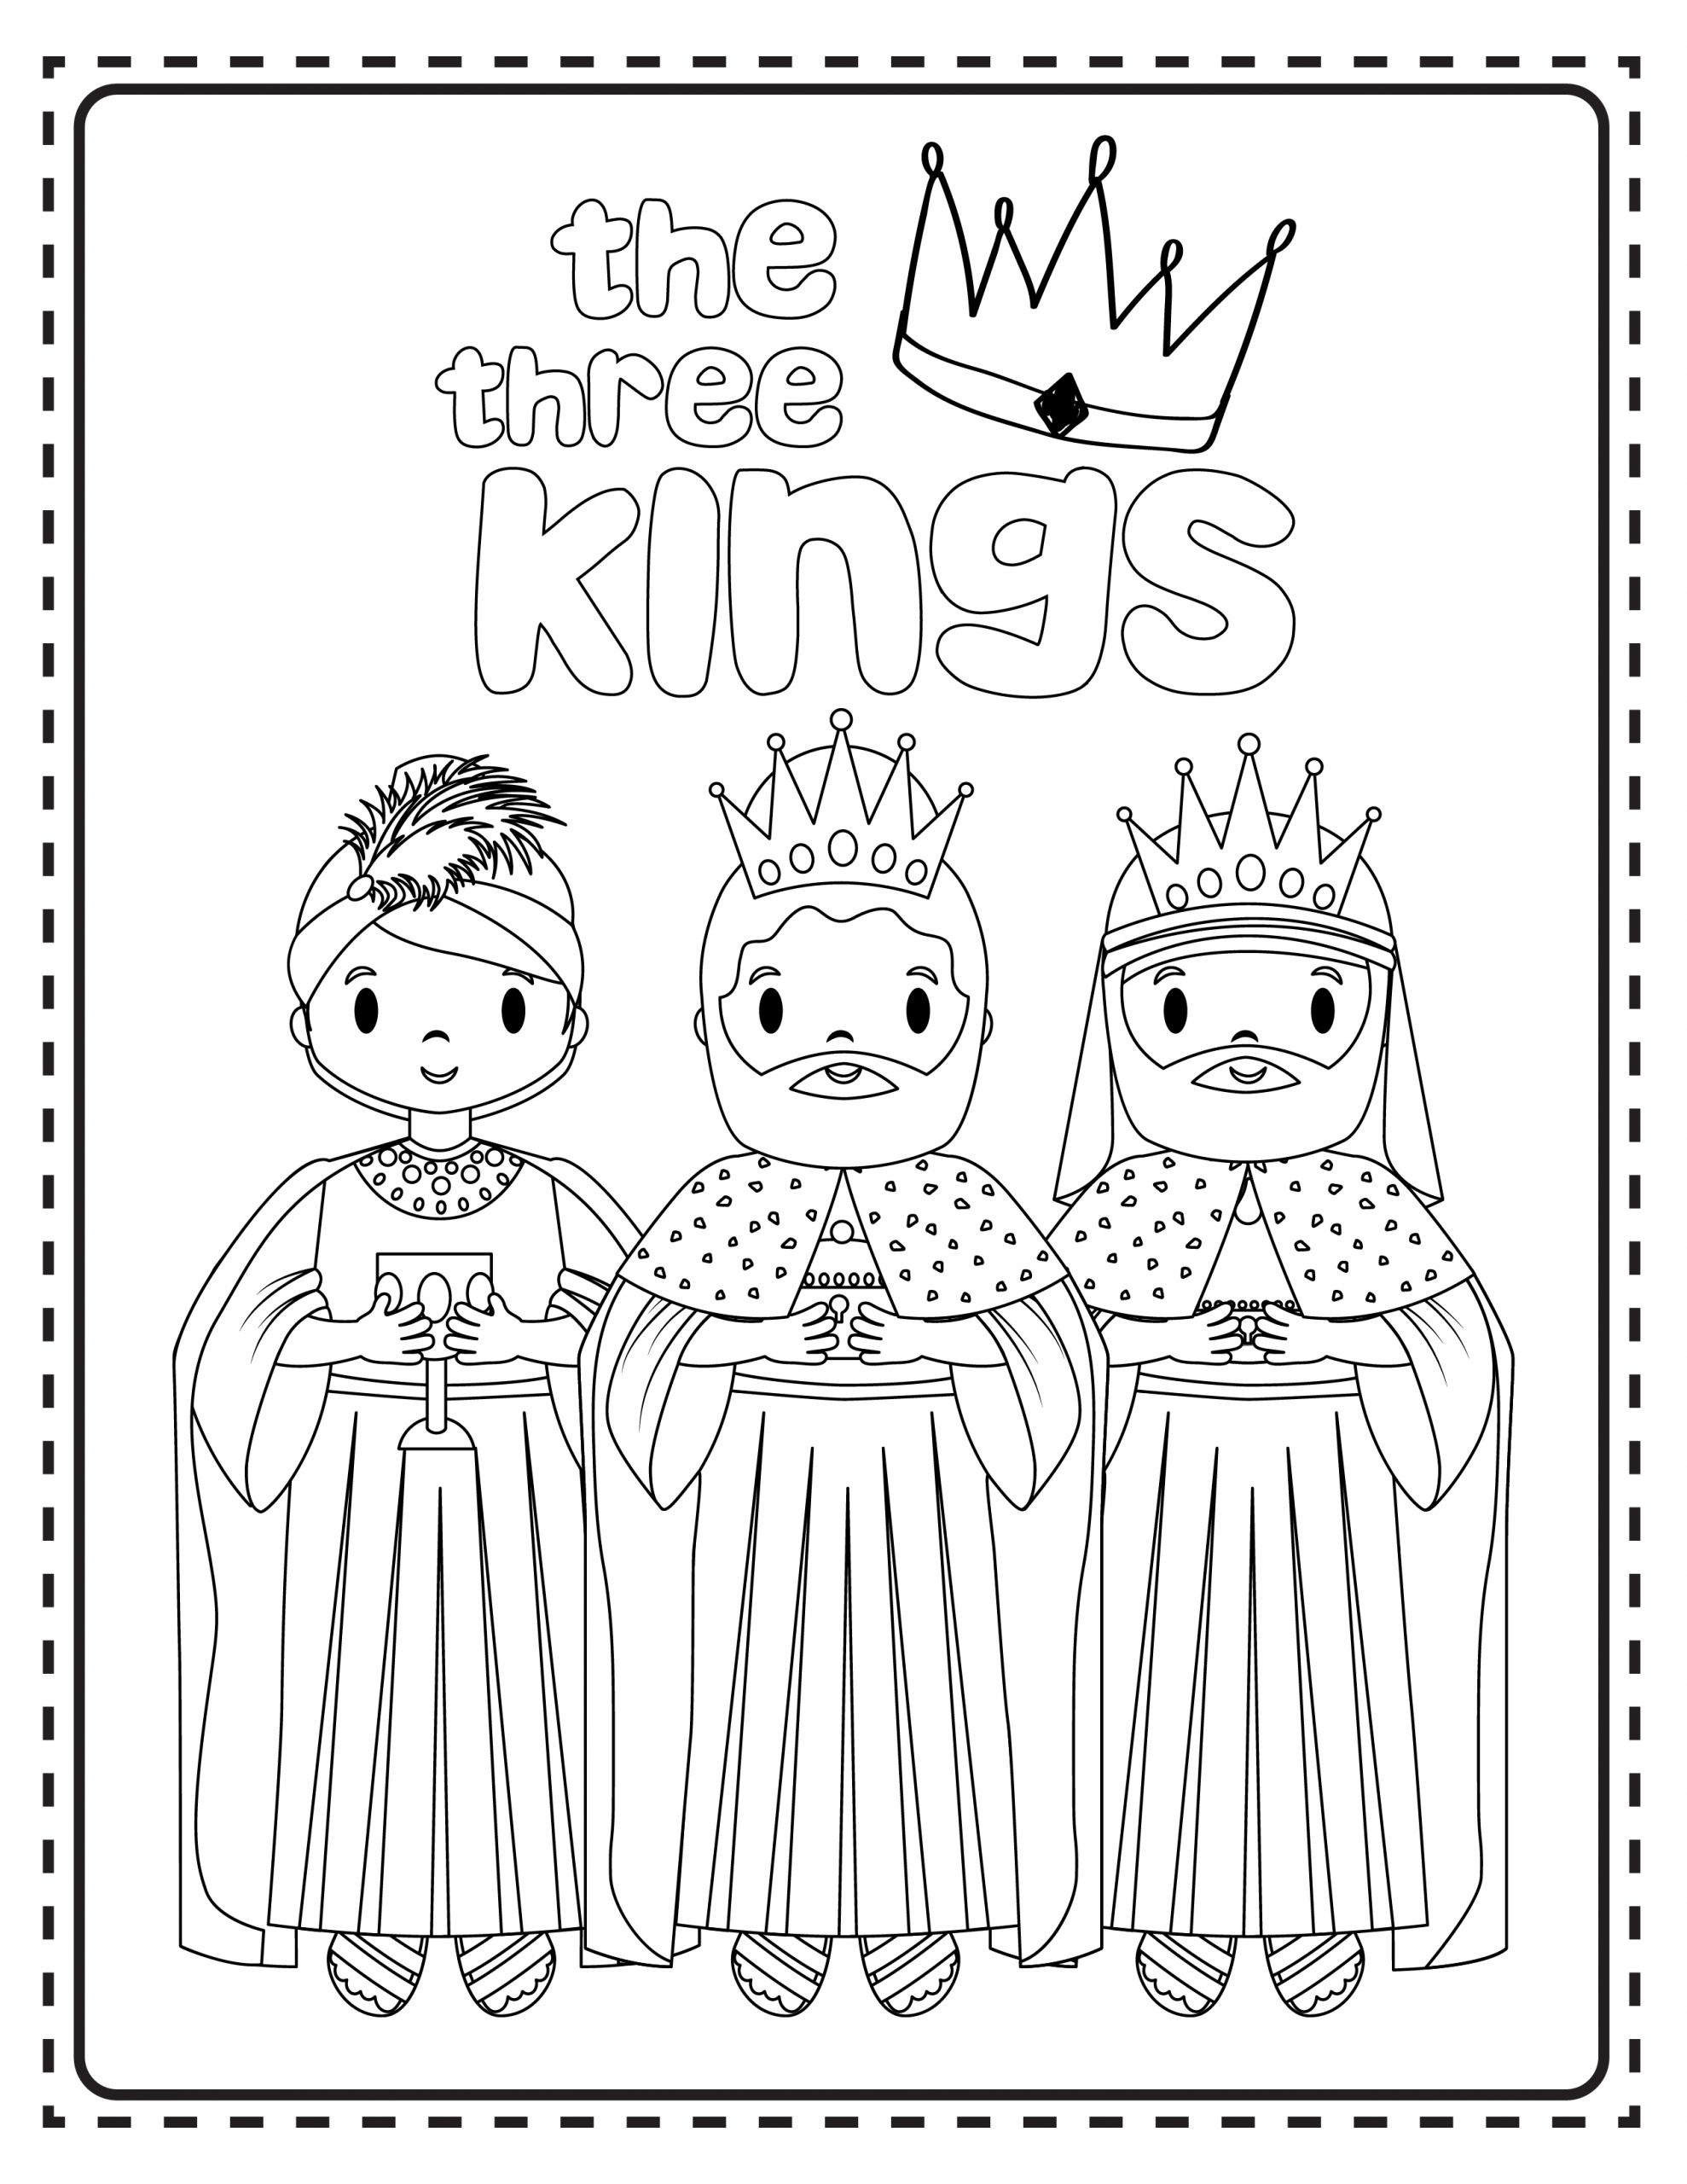 Printable christmas nativity coloring pages